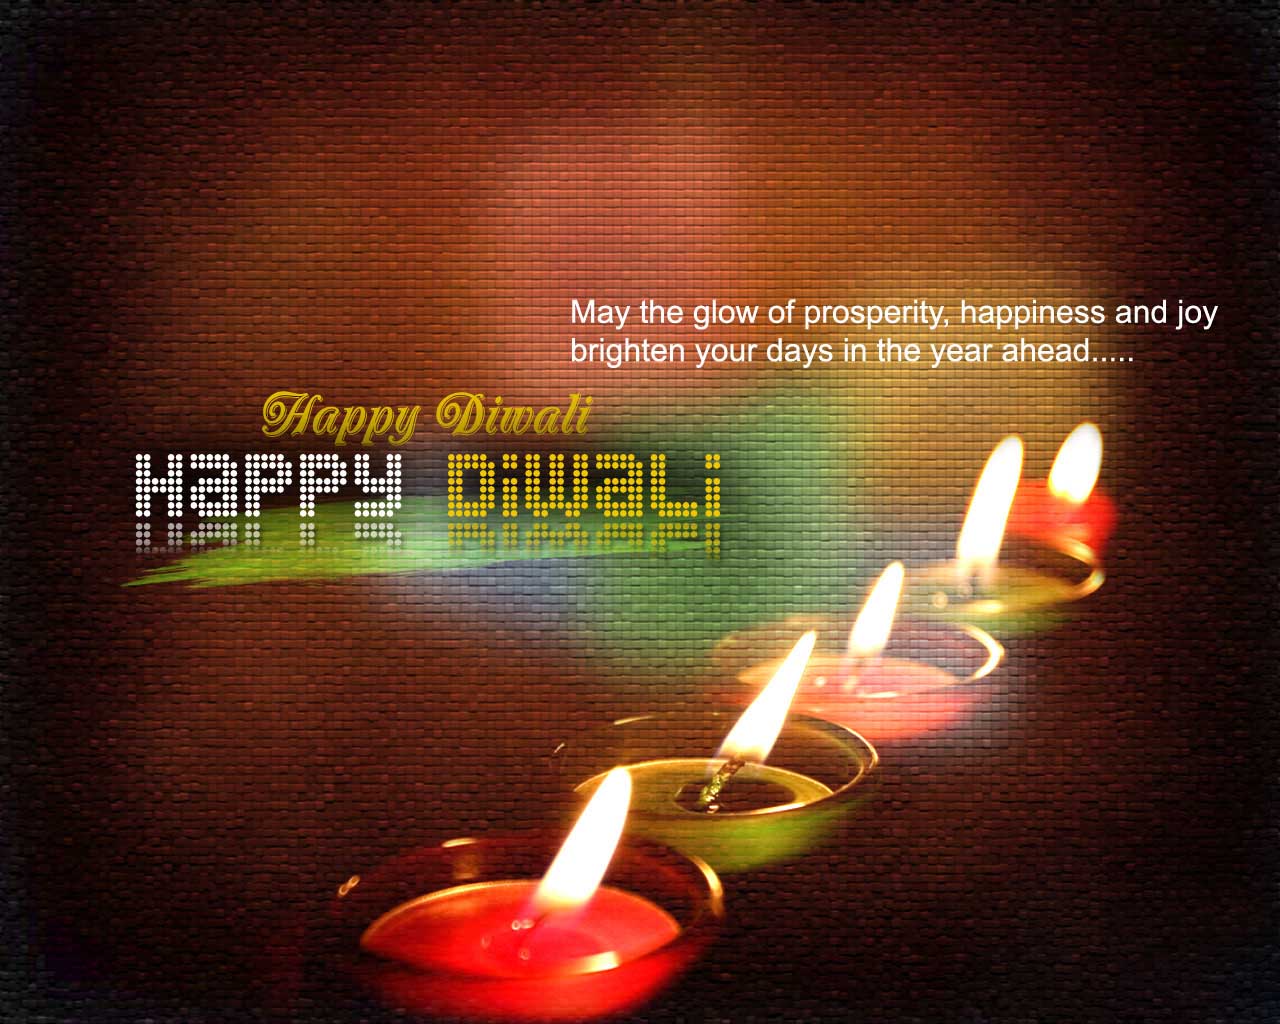 happy diwali images wallpapers,text,lighting,diwali,font,event